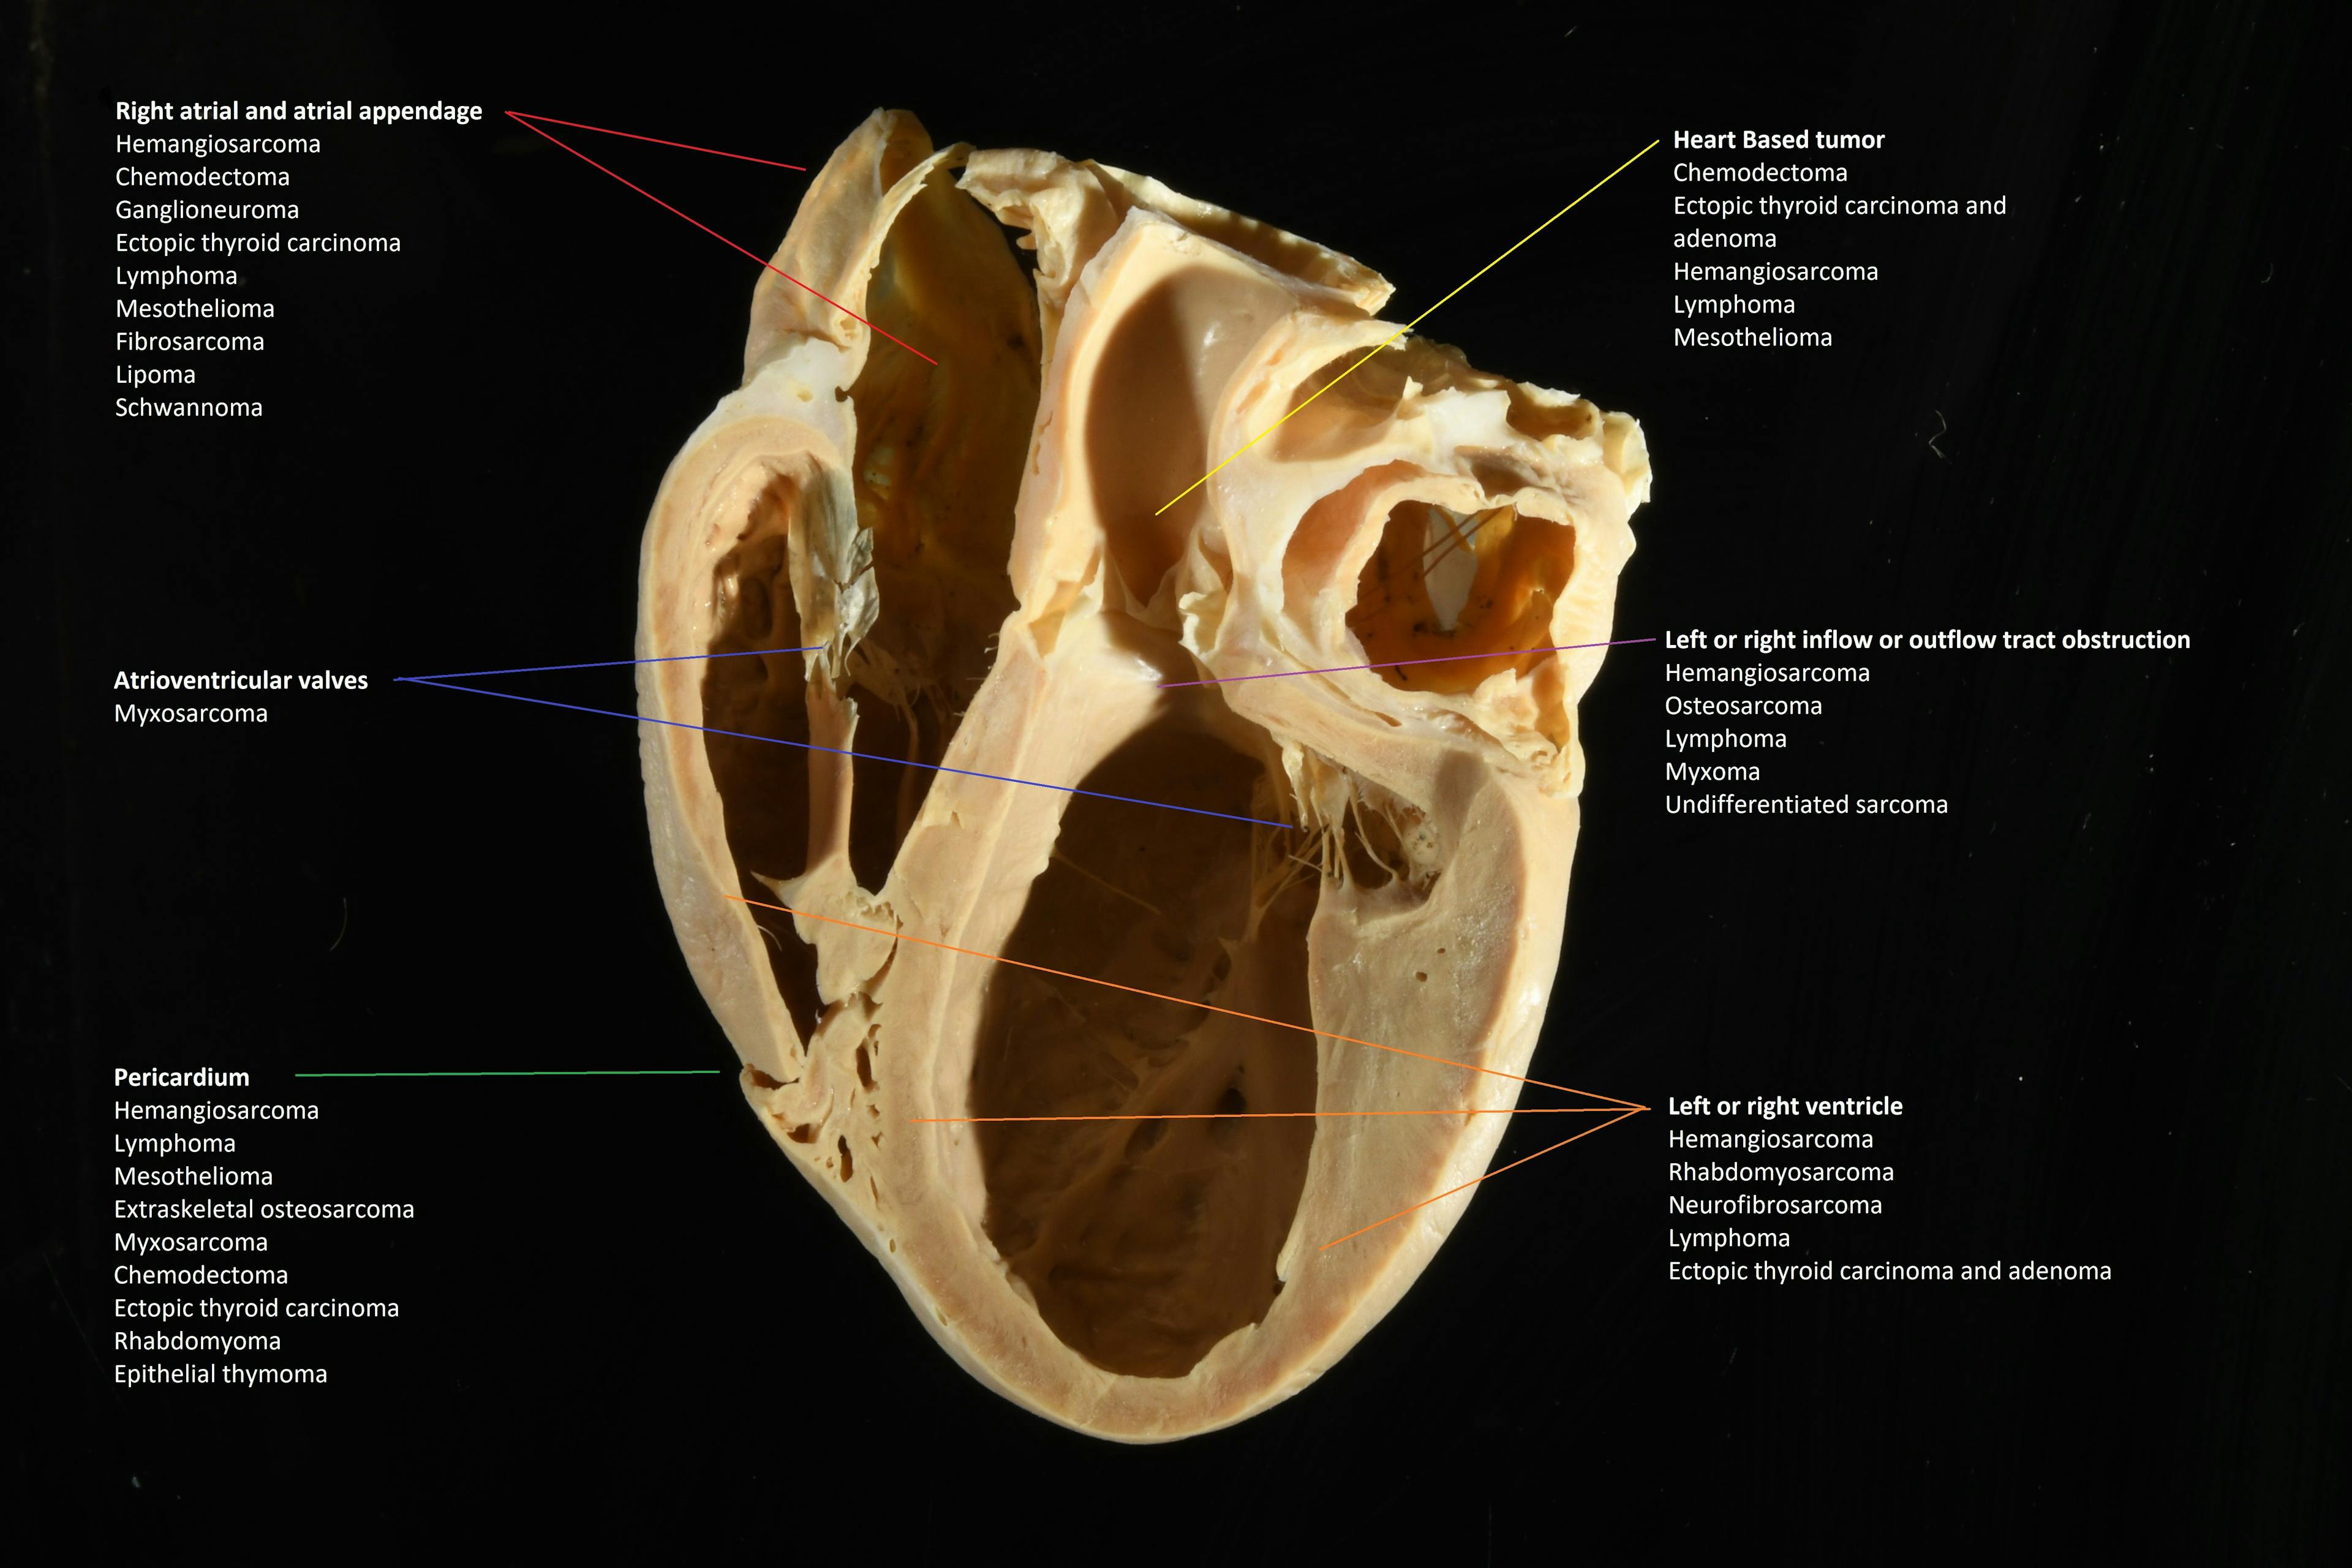 Figure 1. Locations of presumptive and definitive primary cardiac tumors according to echocardiographic anatomic location in dogs and cats. All images courtesy of Liza S Köster, BVSc(Hons).